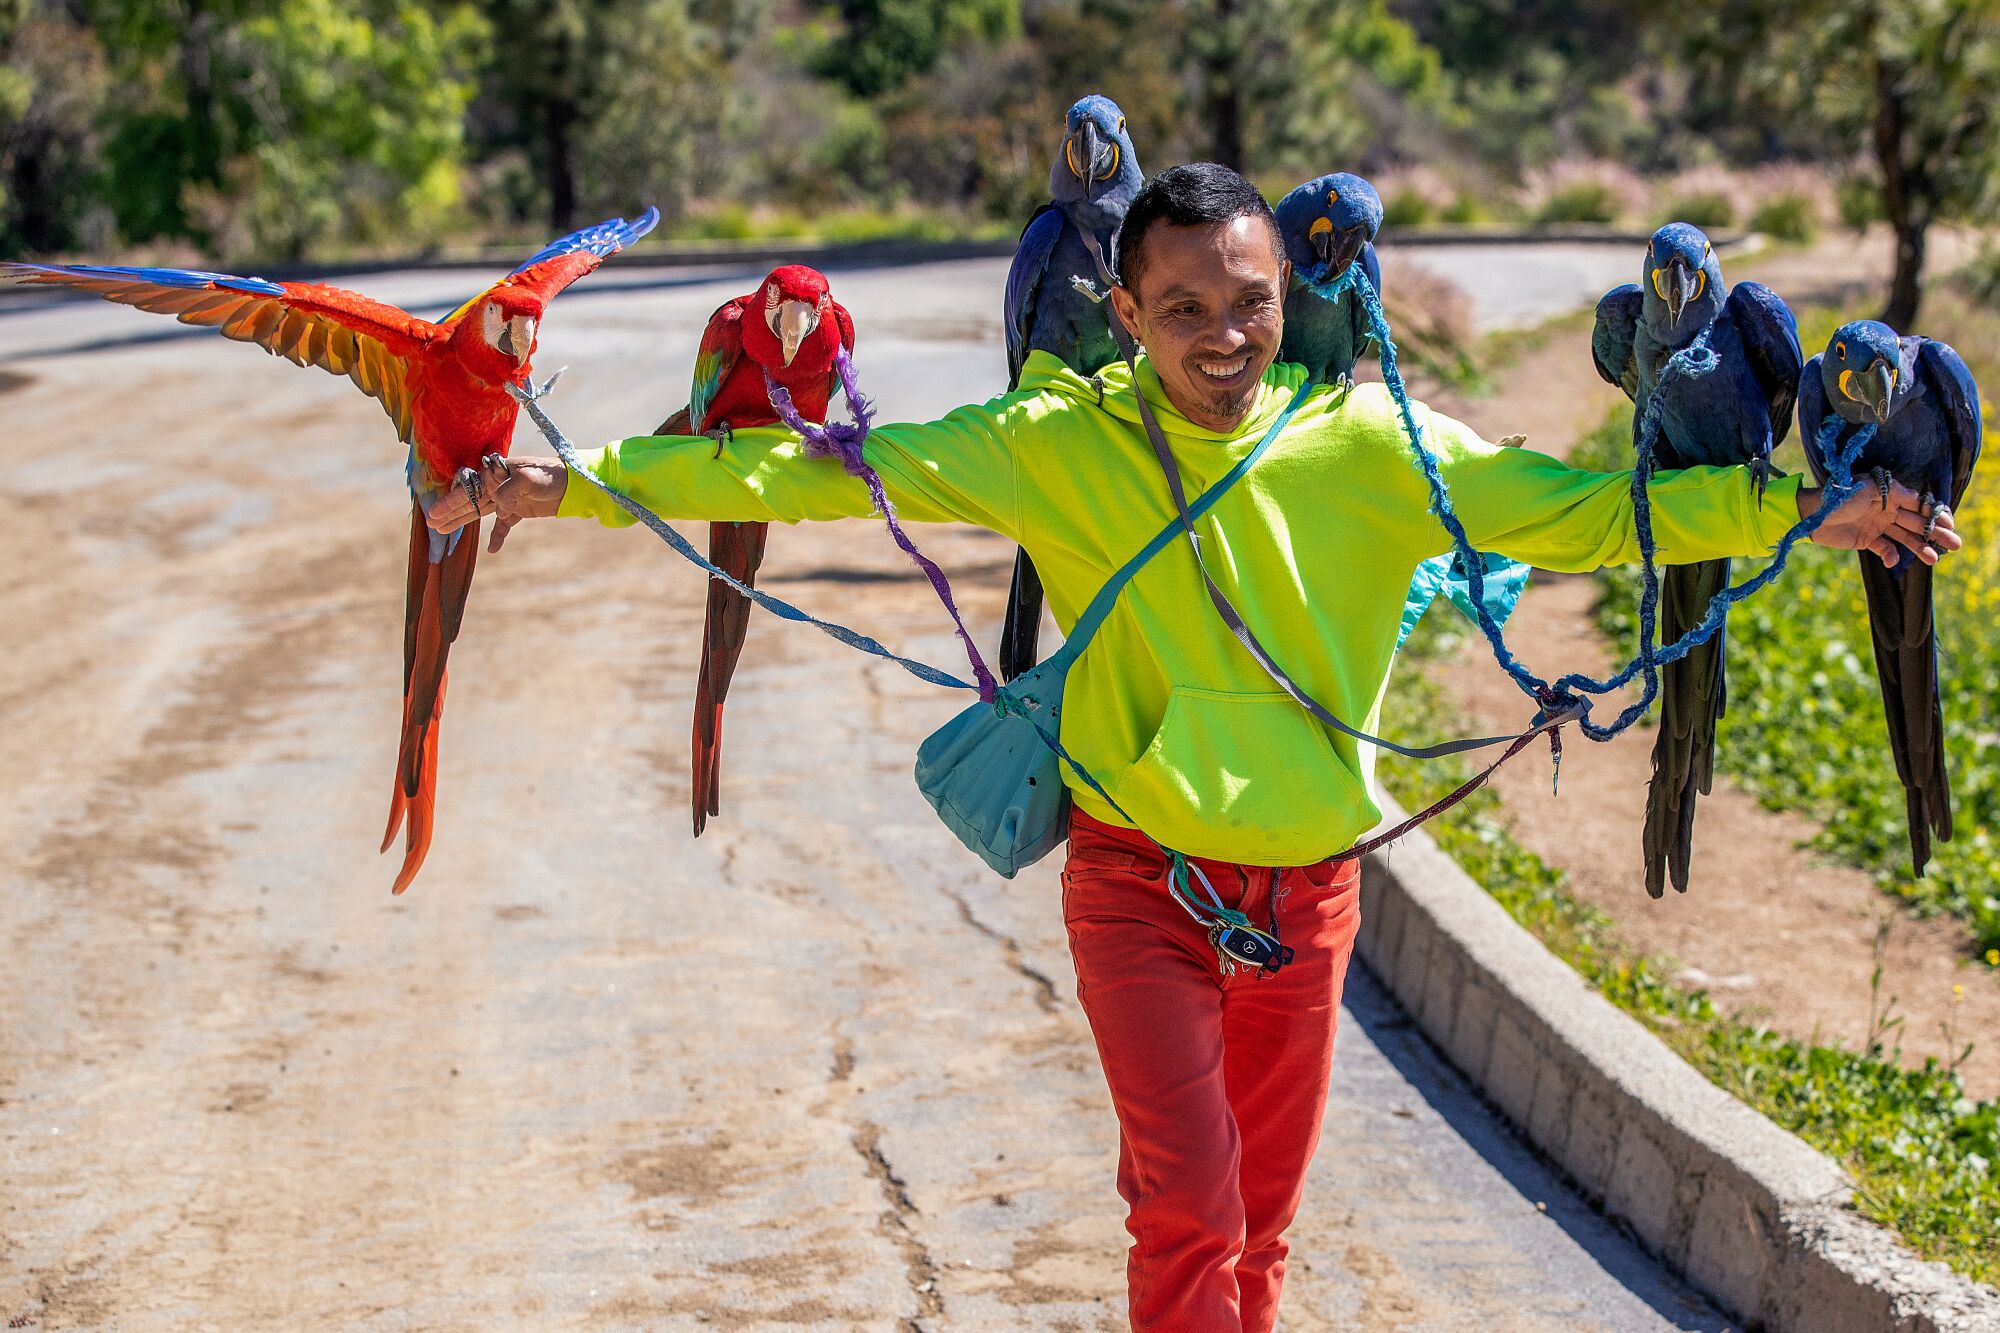 A man in colorful clothes walks on a dirt trail, his arms extended, with six macaws sitting on his arms and shoulders